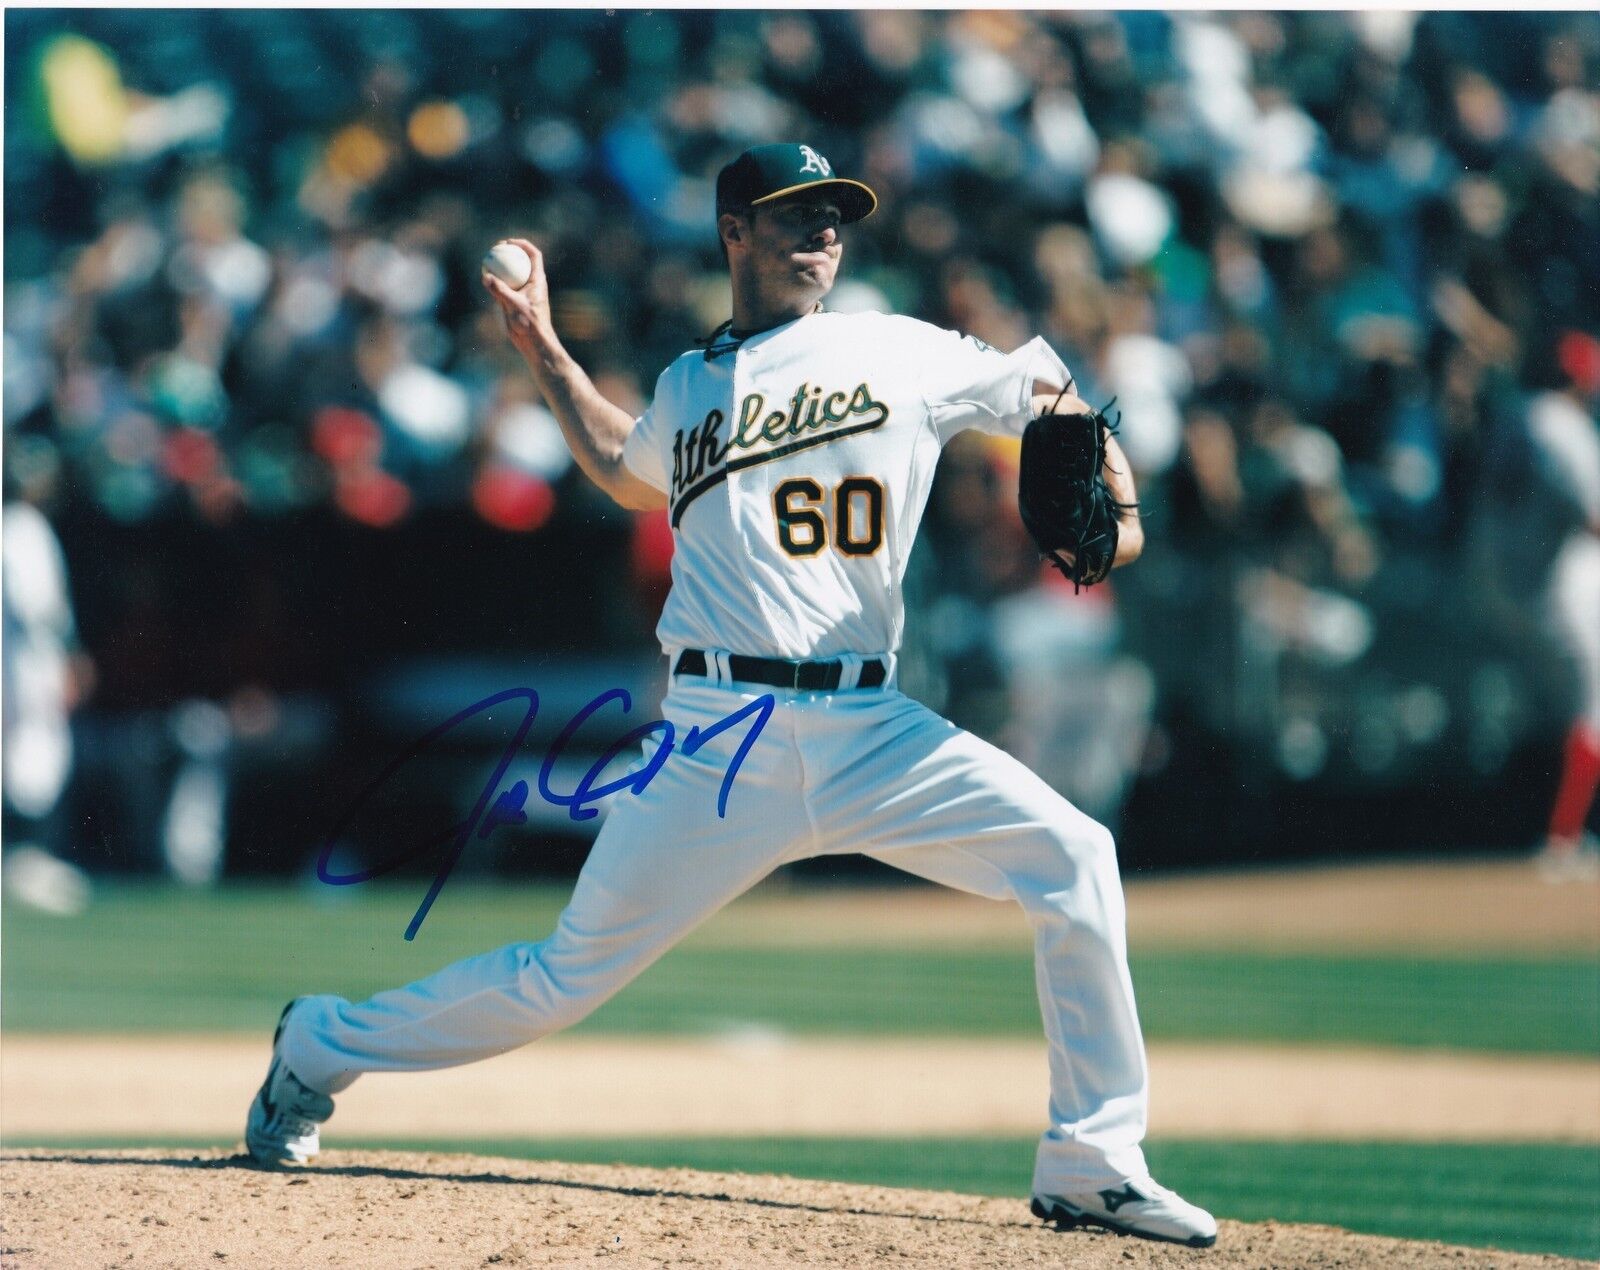 JEFF GRAY OAKLAND A'S ACTION SIGNED 8x10